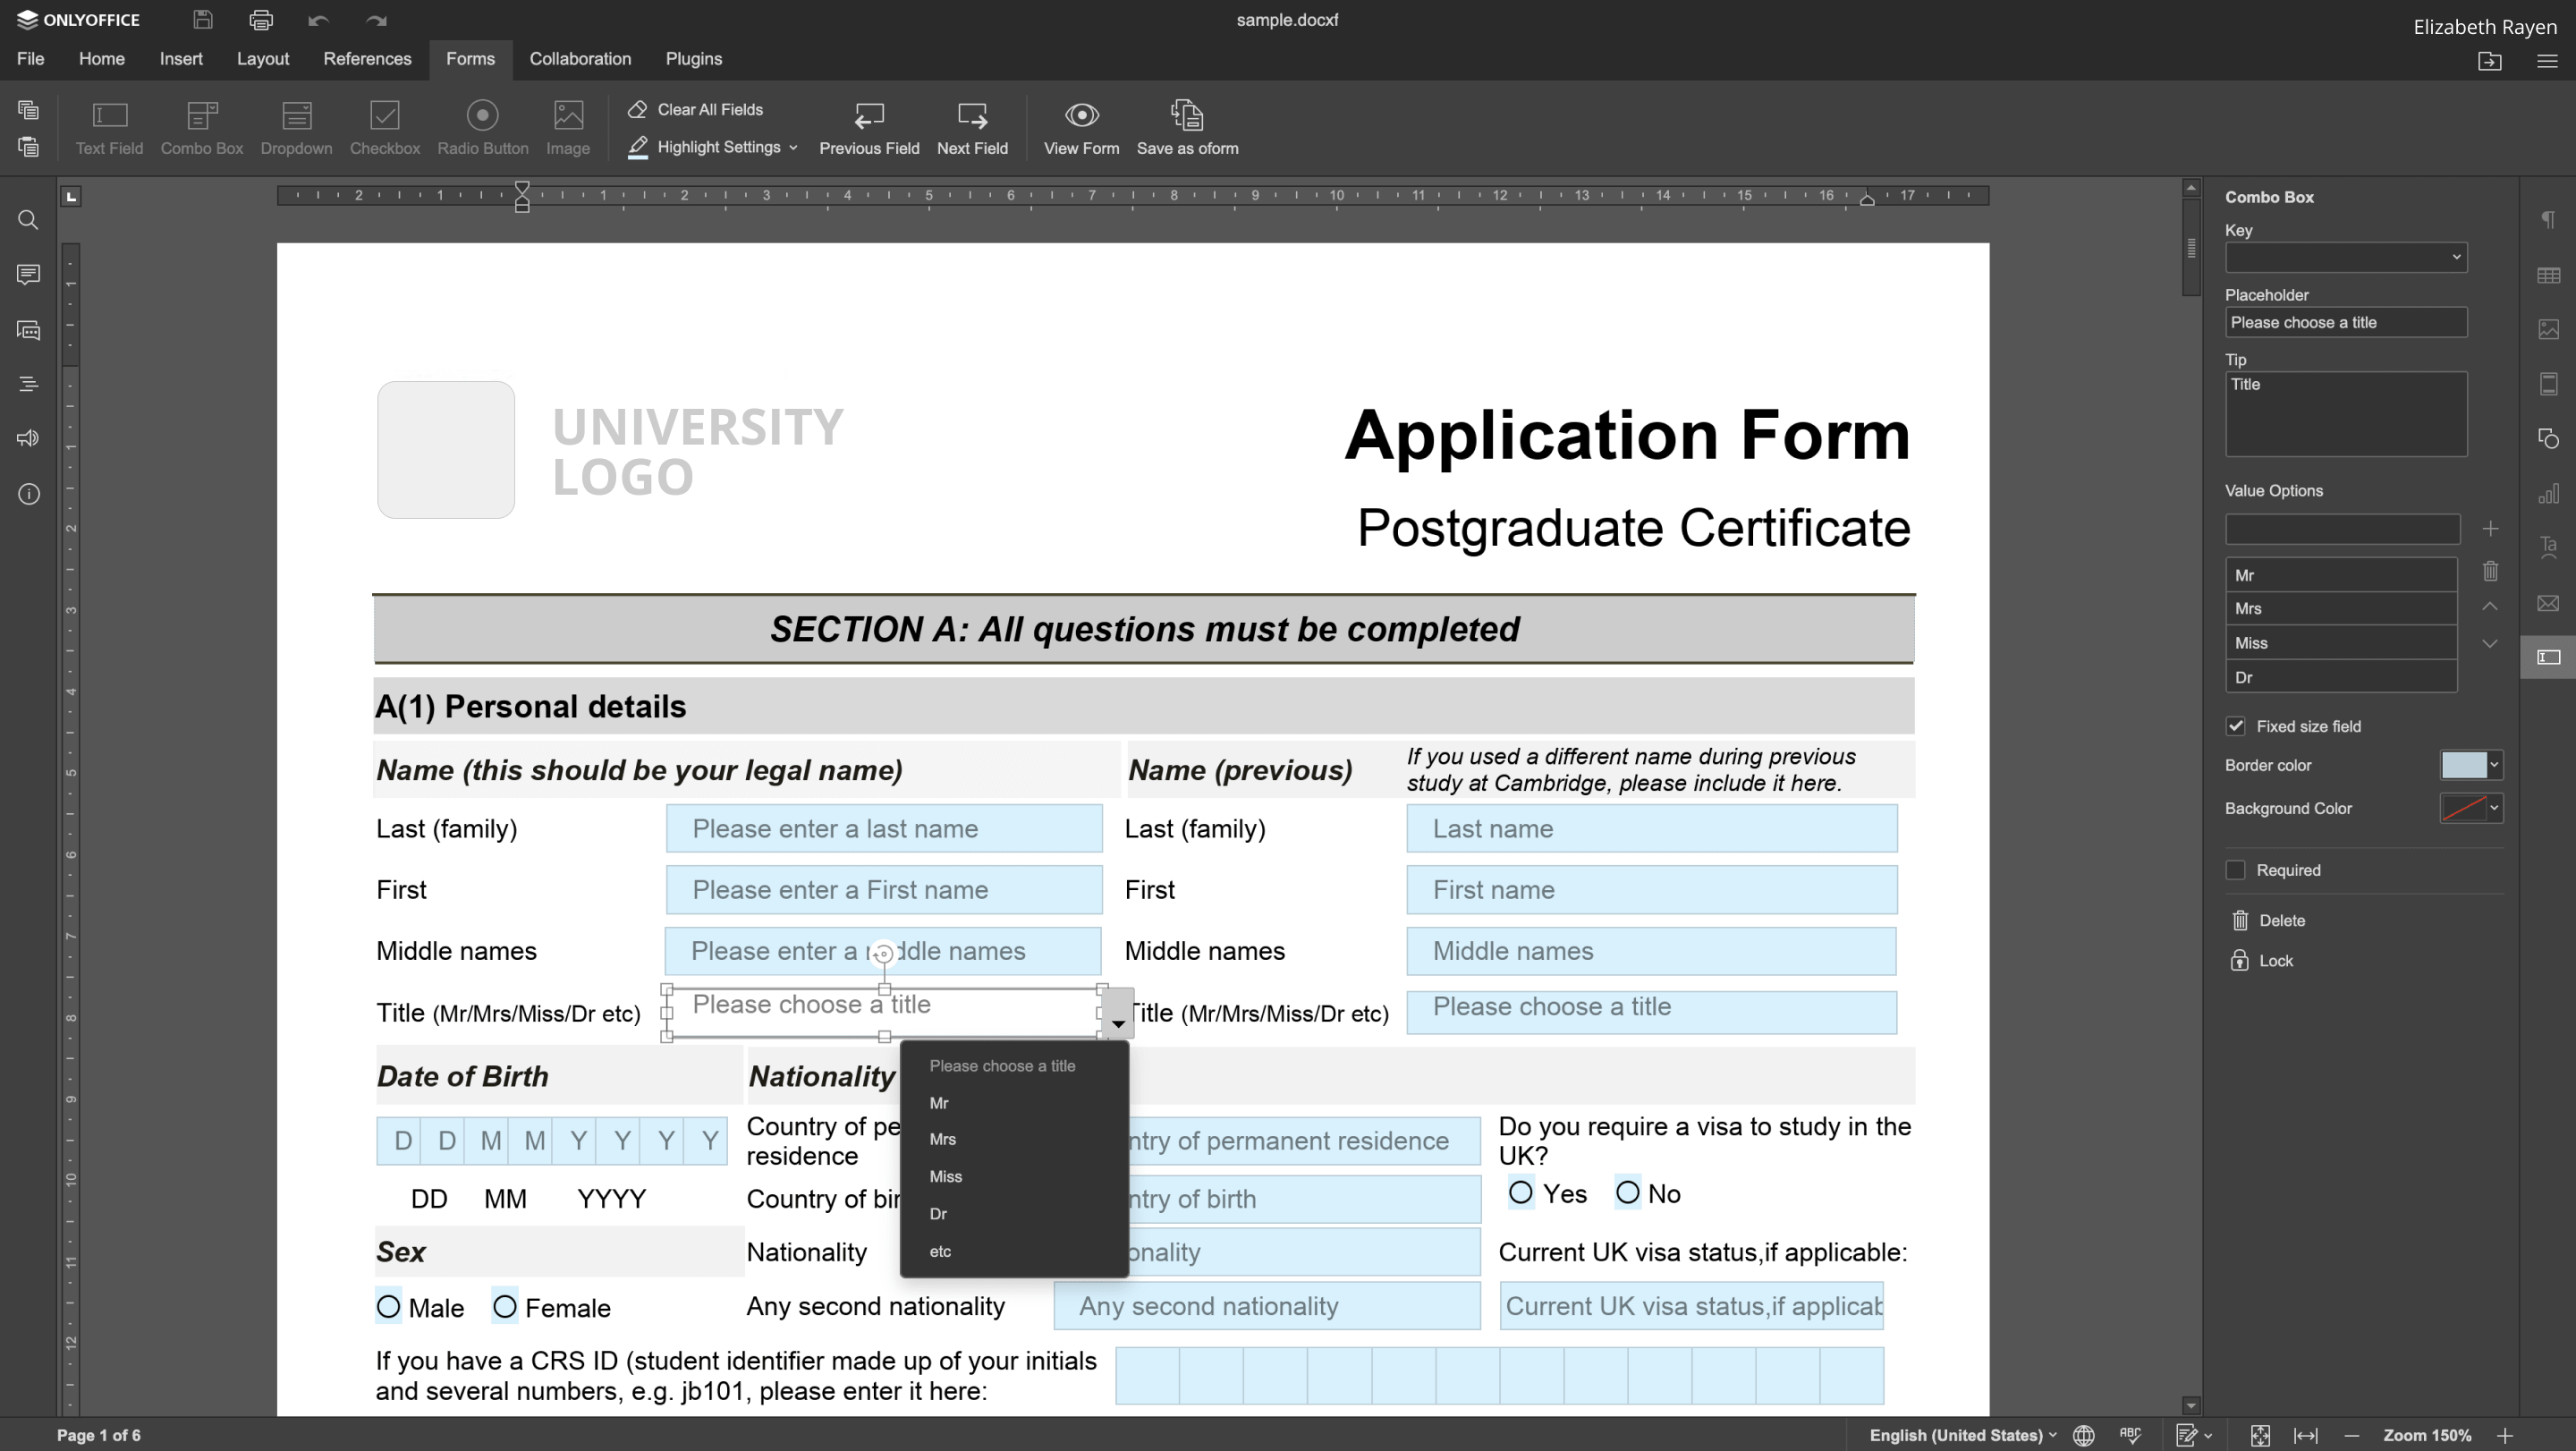 Creating forms in ONLYOFFICE Docs